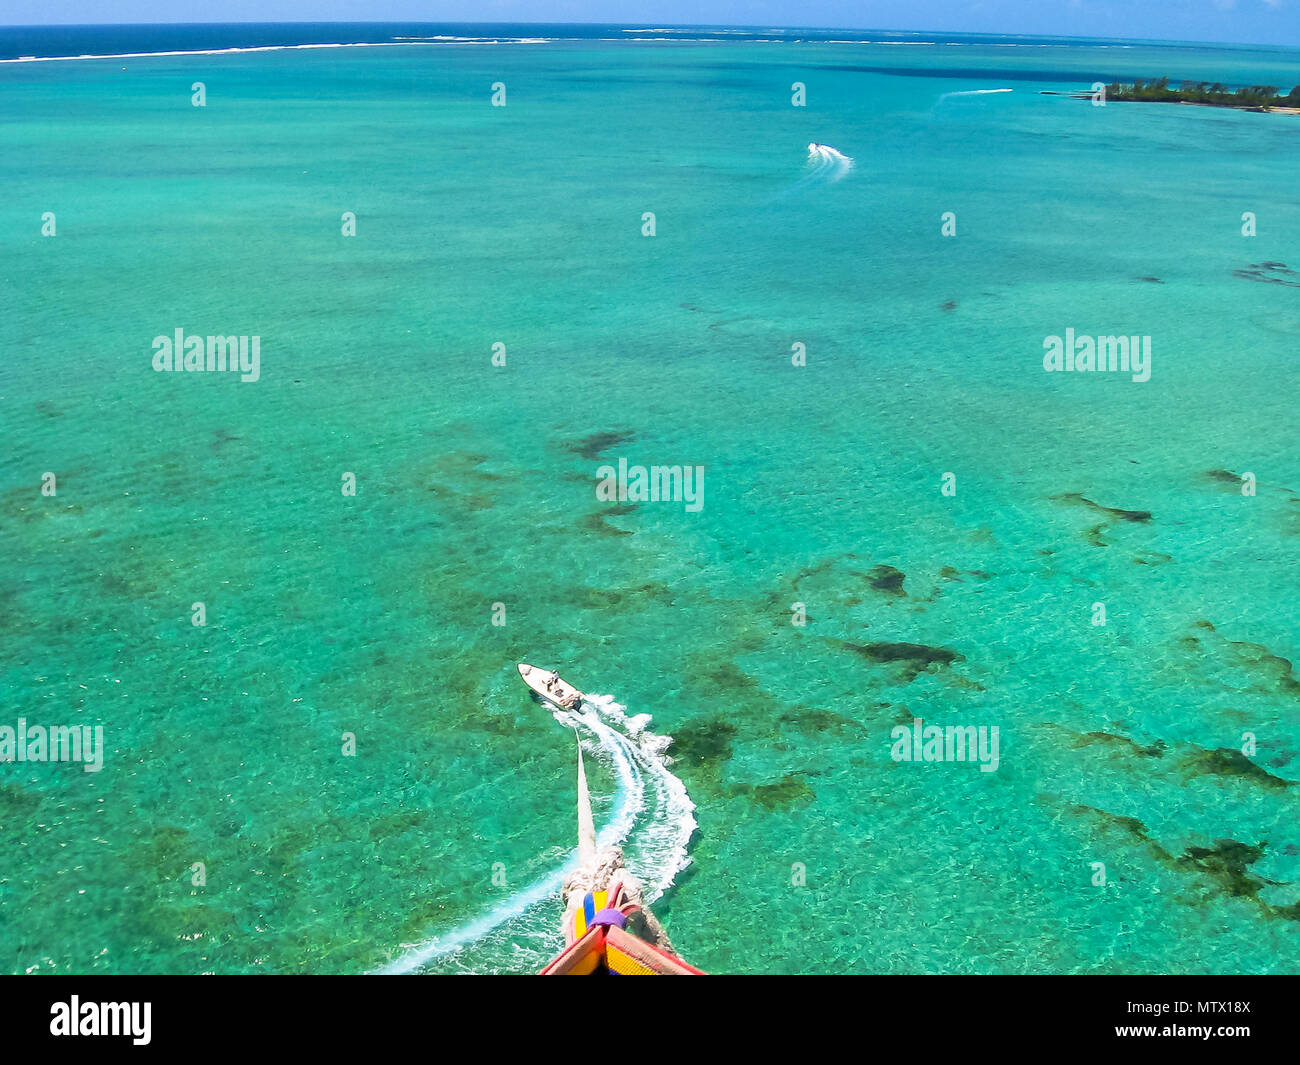 Aerial view of speedboat during a flight with parasailing, a major attraction in Deer Island, east coast of Mauritius, Indian Ocean. Stock Photo